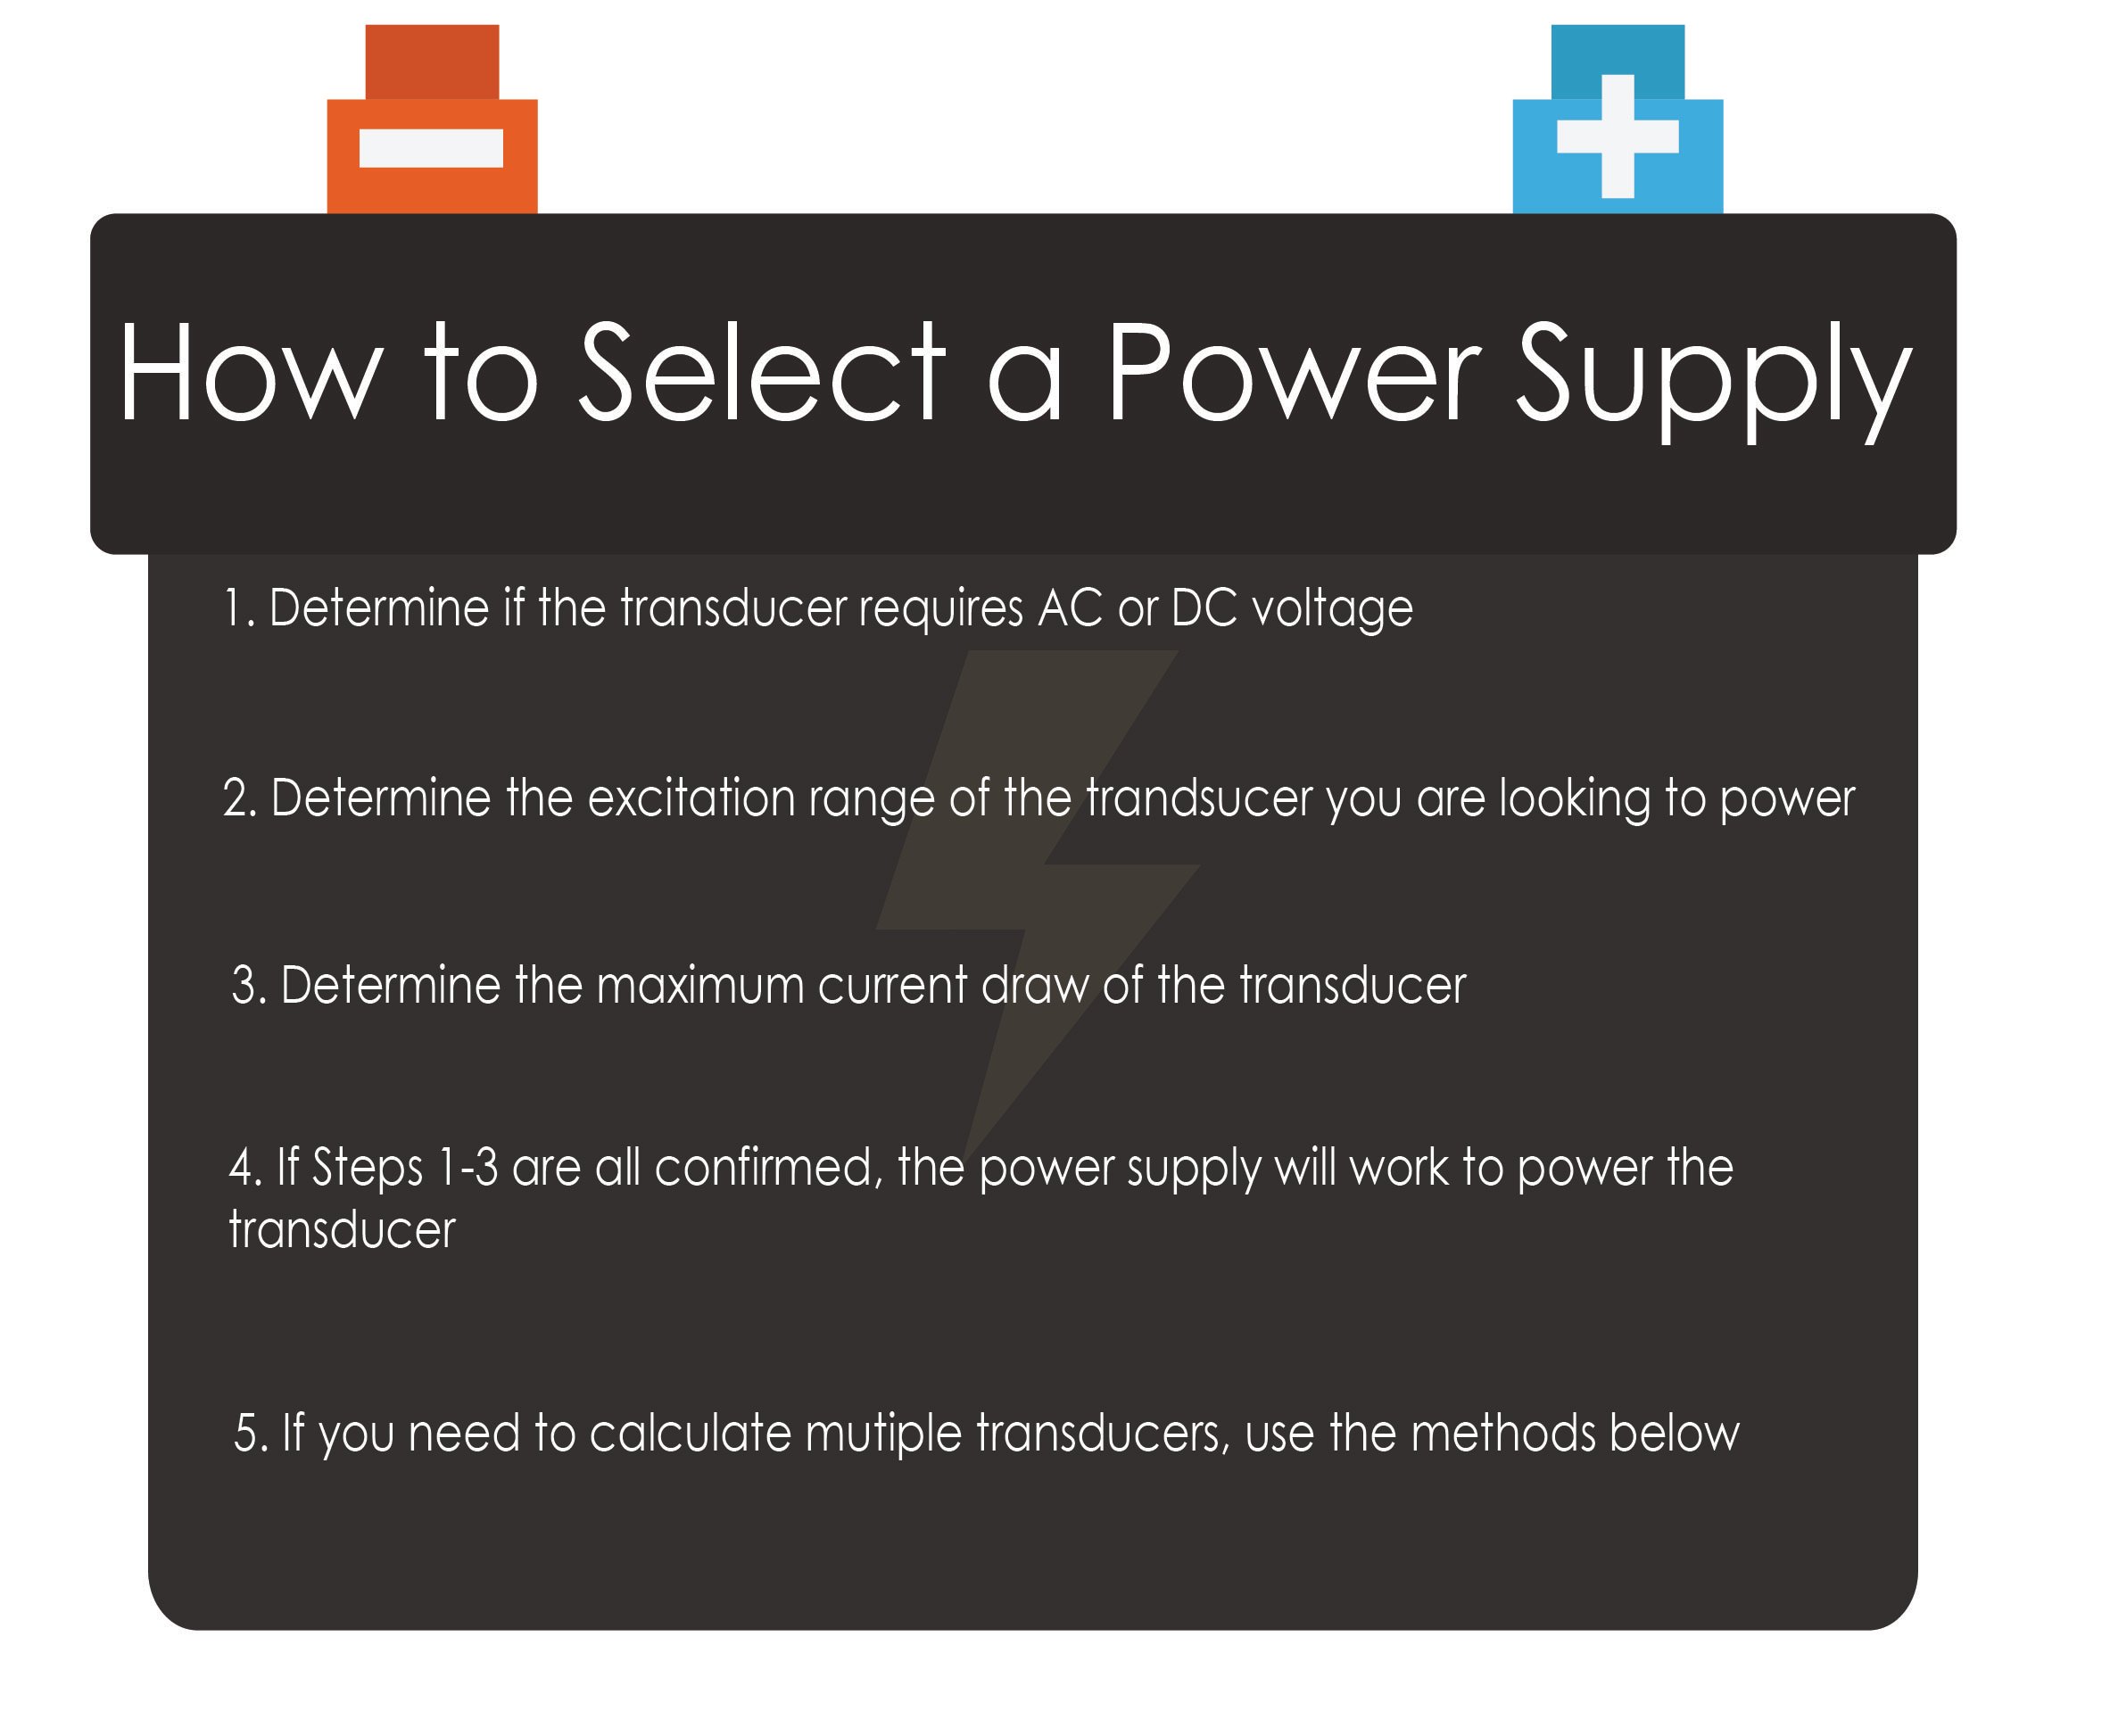 How to Select a Power Supply